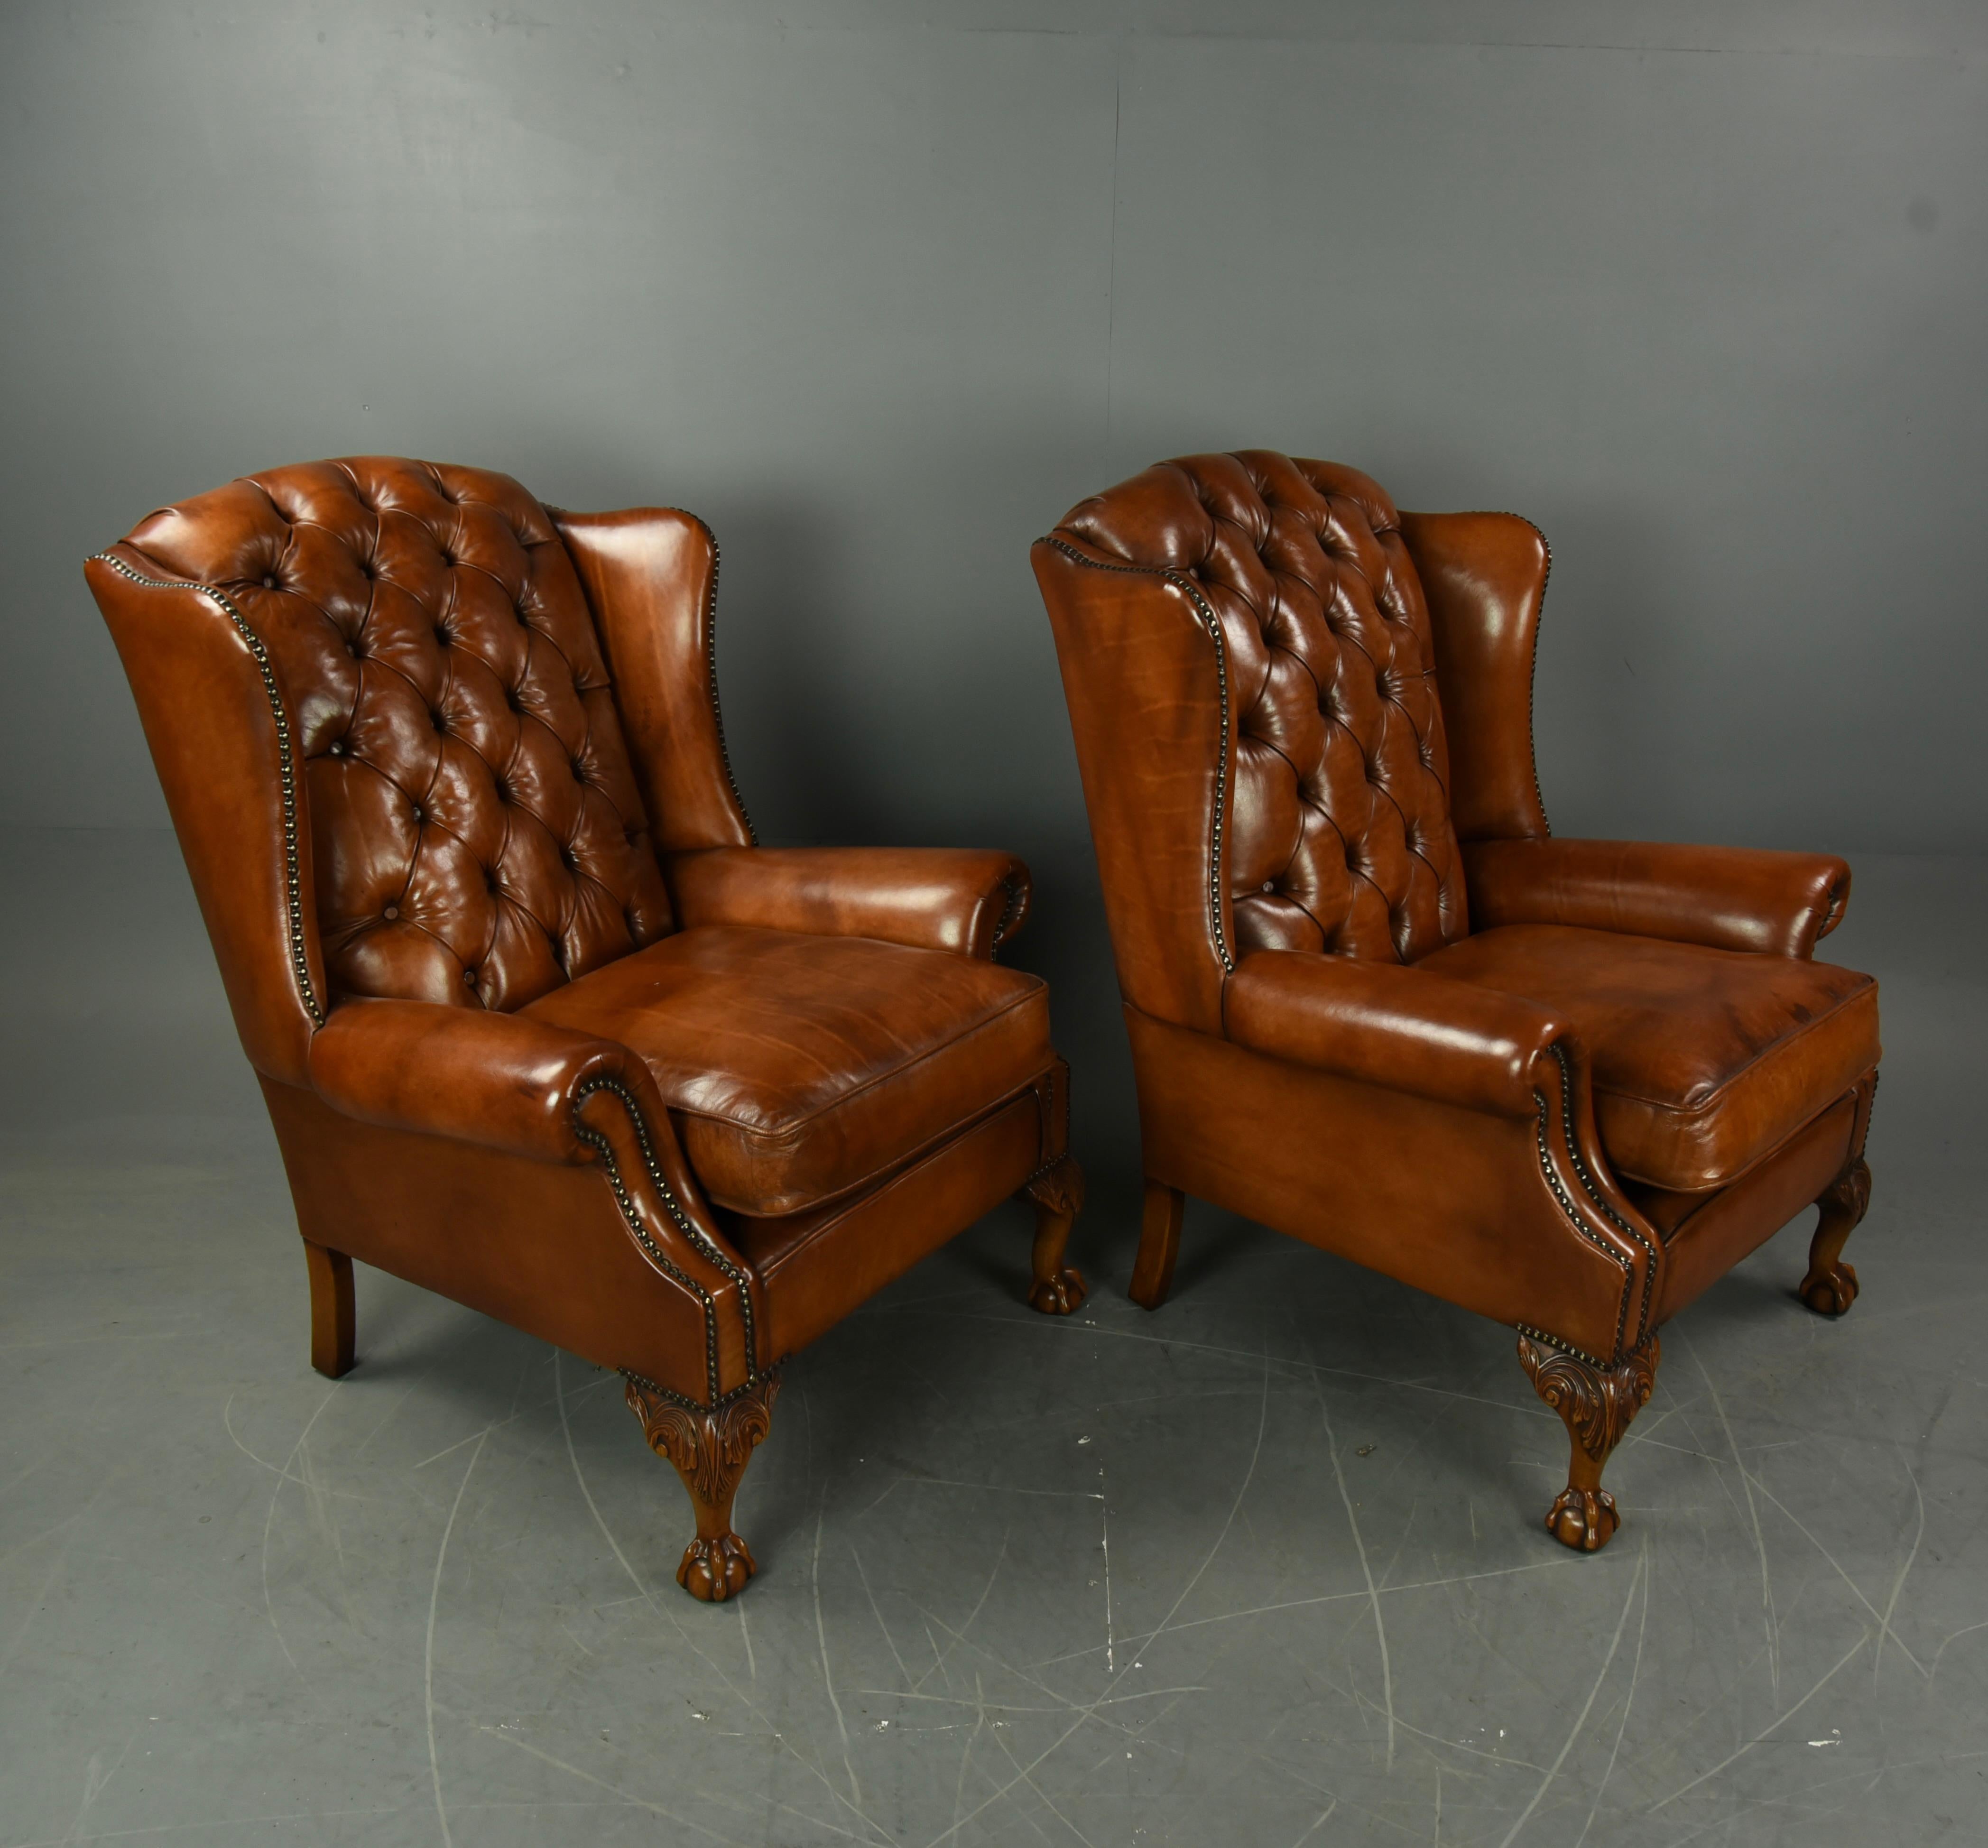 Fine Quality pair of leather wing chairs .
The chairs have been fully re furbished to the highest standards.
They have been upholstered in the finest leather and have been hand dyed and finished to the highest standard.
They stand on fine carved